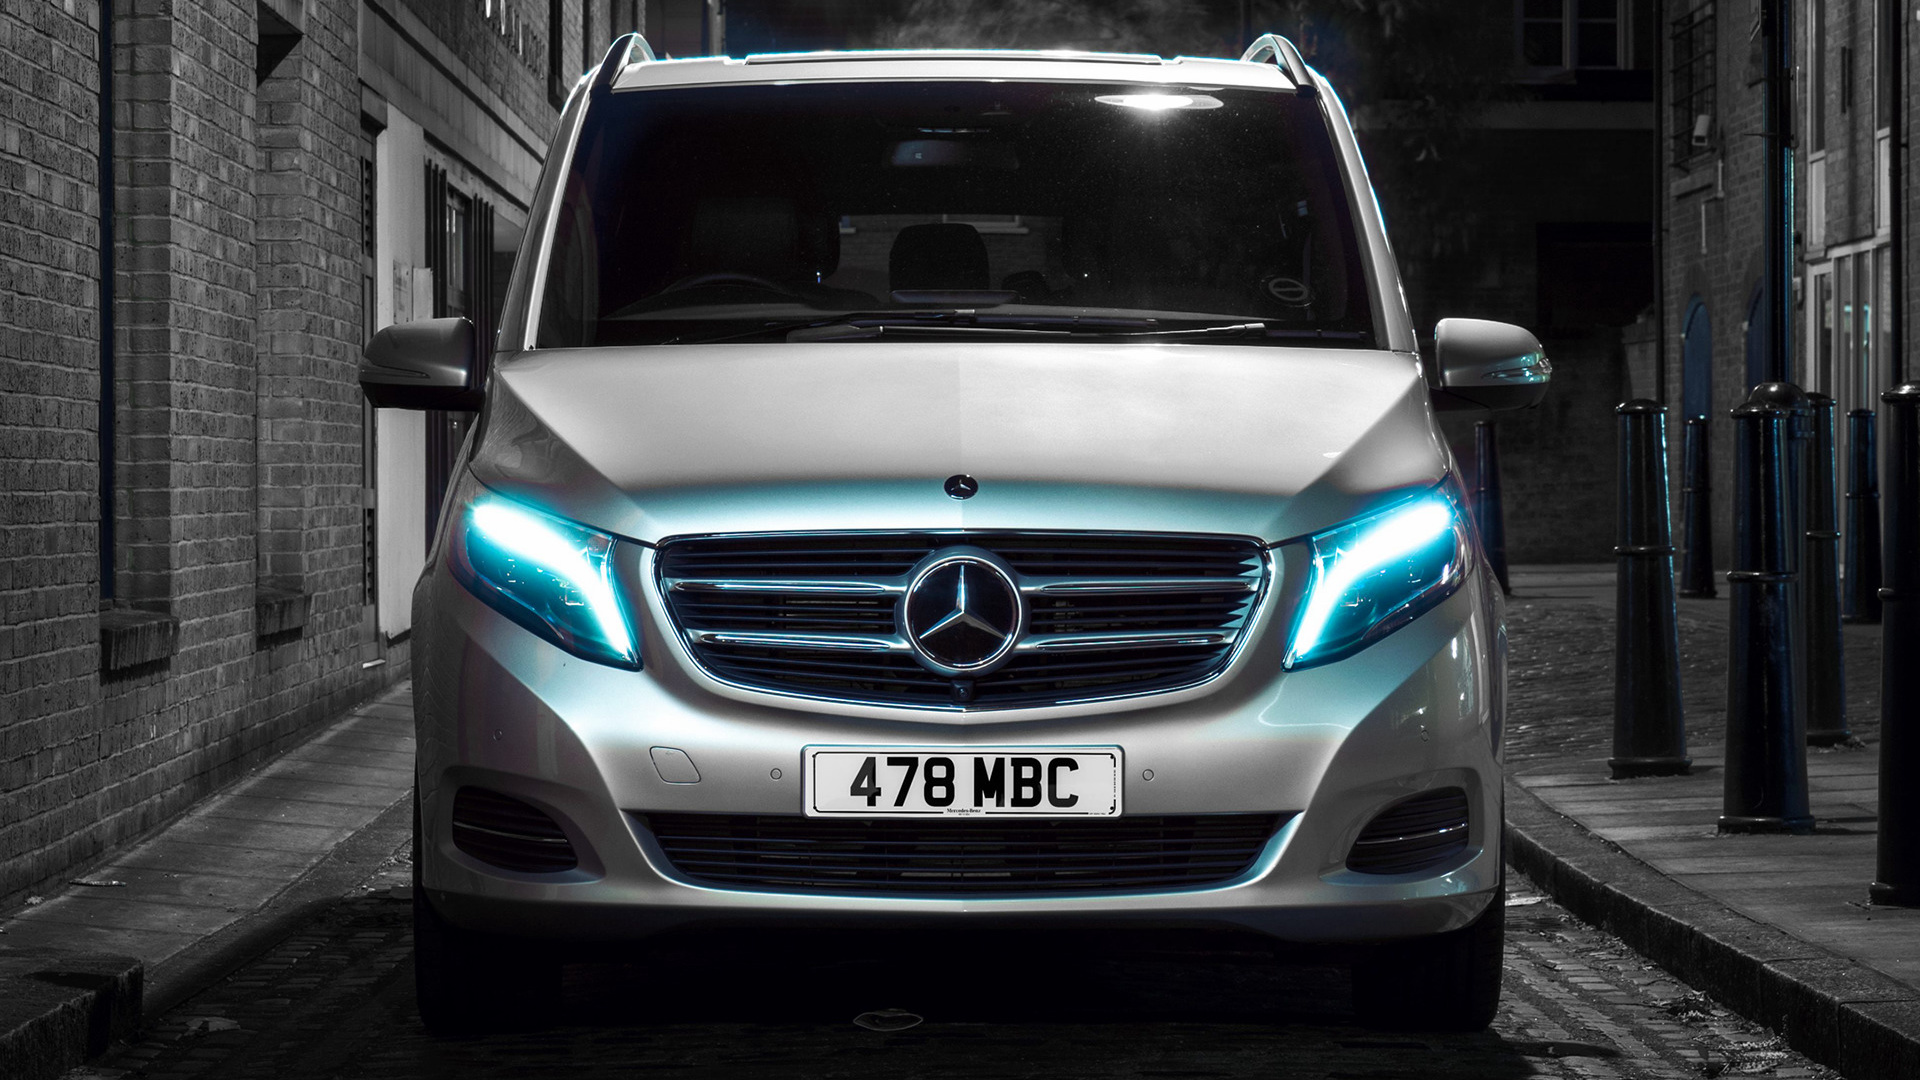 2015 Mercedes-Benz V-Class [ExtraLong] (UK) - Wallpapers and HD Images